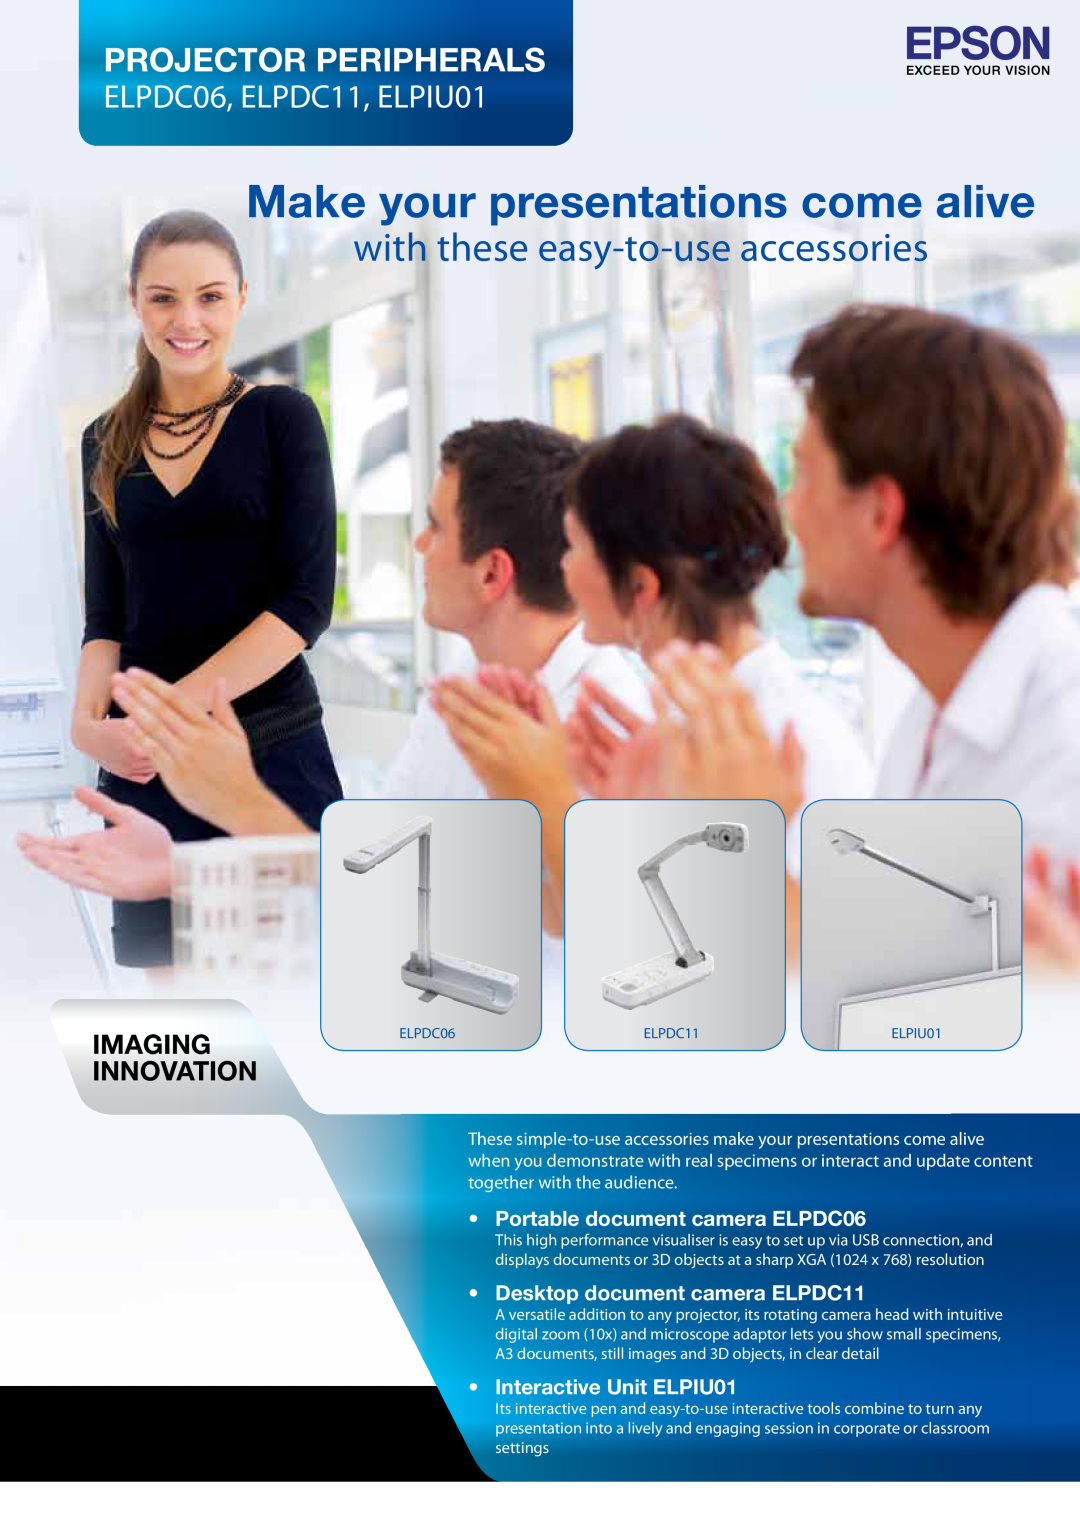 Epson ELPDC11 manual Make your presentations come alive, with these easy-to-use accessories, Projector Peripherals 